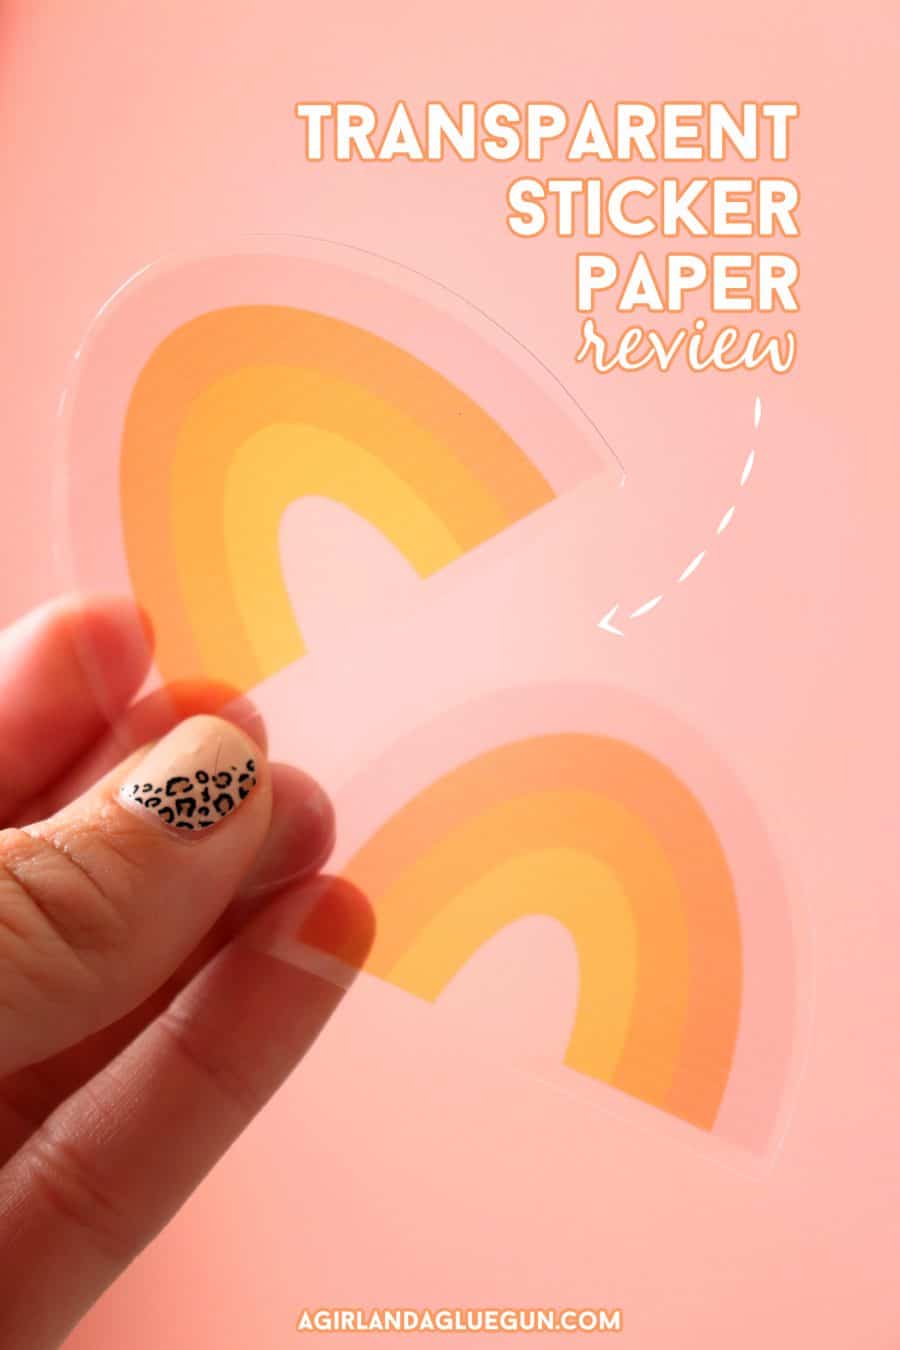 The Best sticker paper to use - A girl and a glue gun